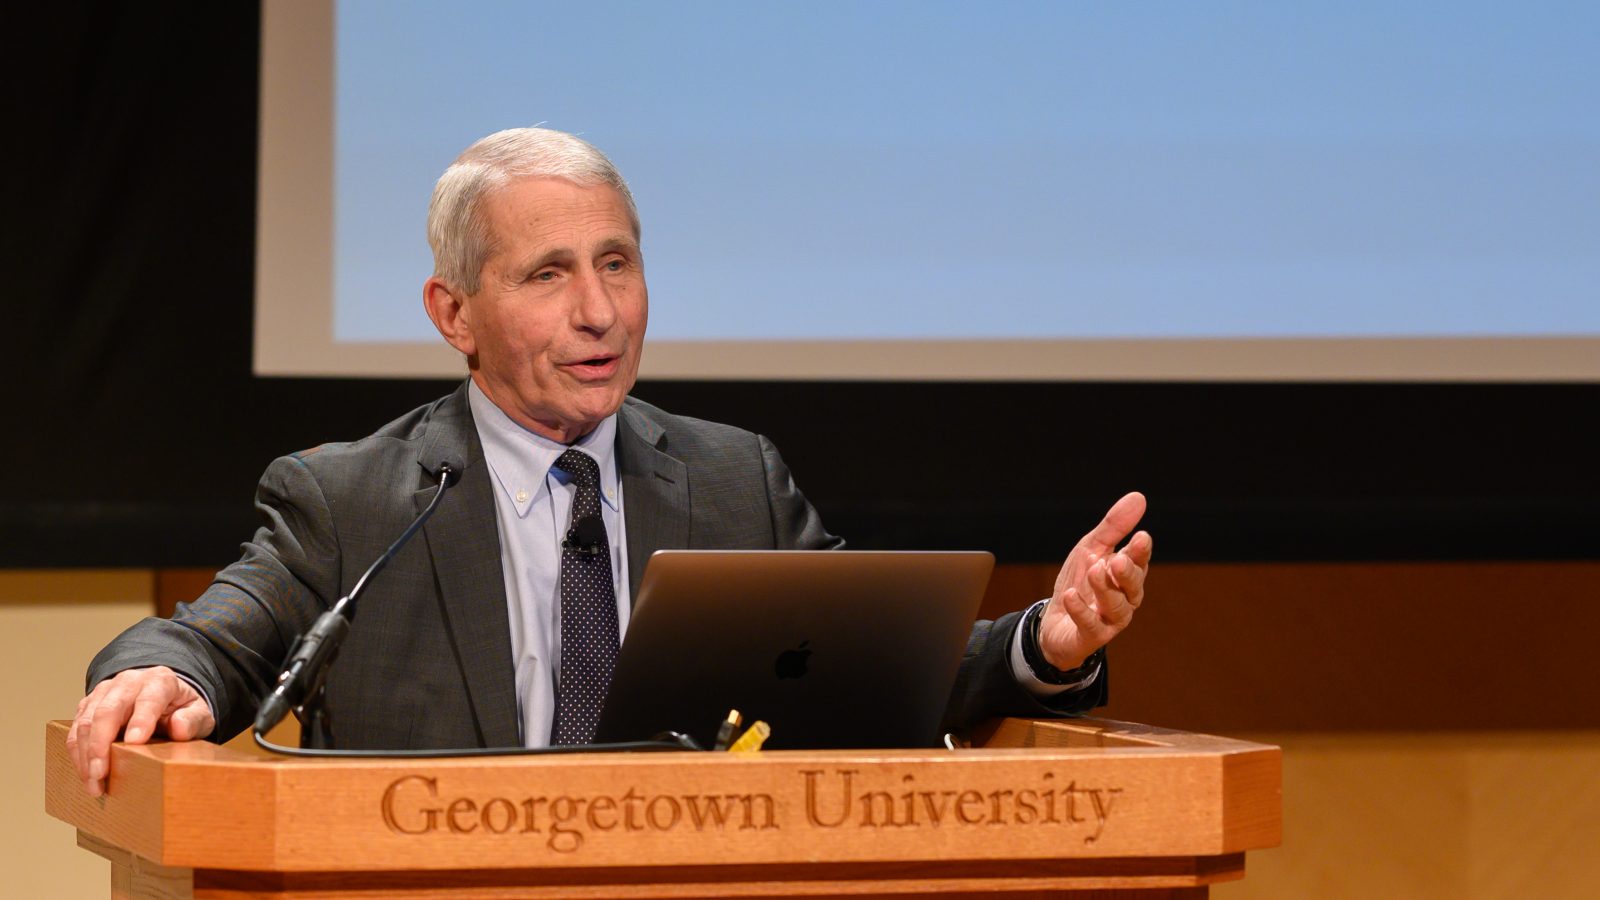 Dr. Anthony Fauci delivers a presentation at a podium in the Lohrfink Auditorium